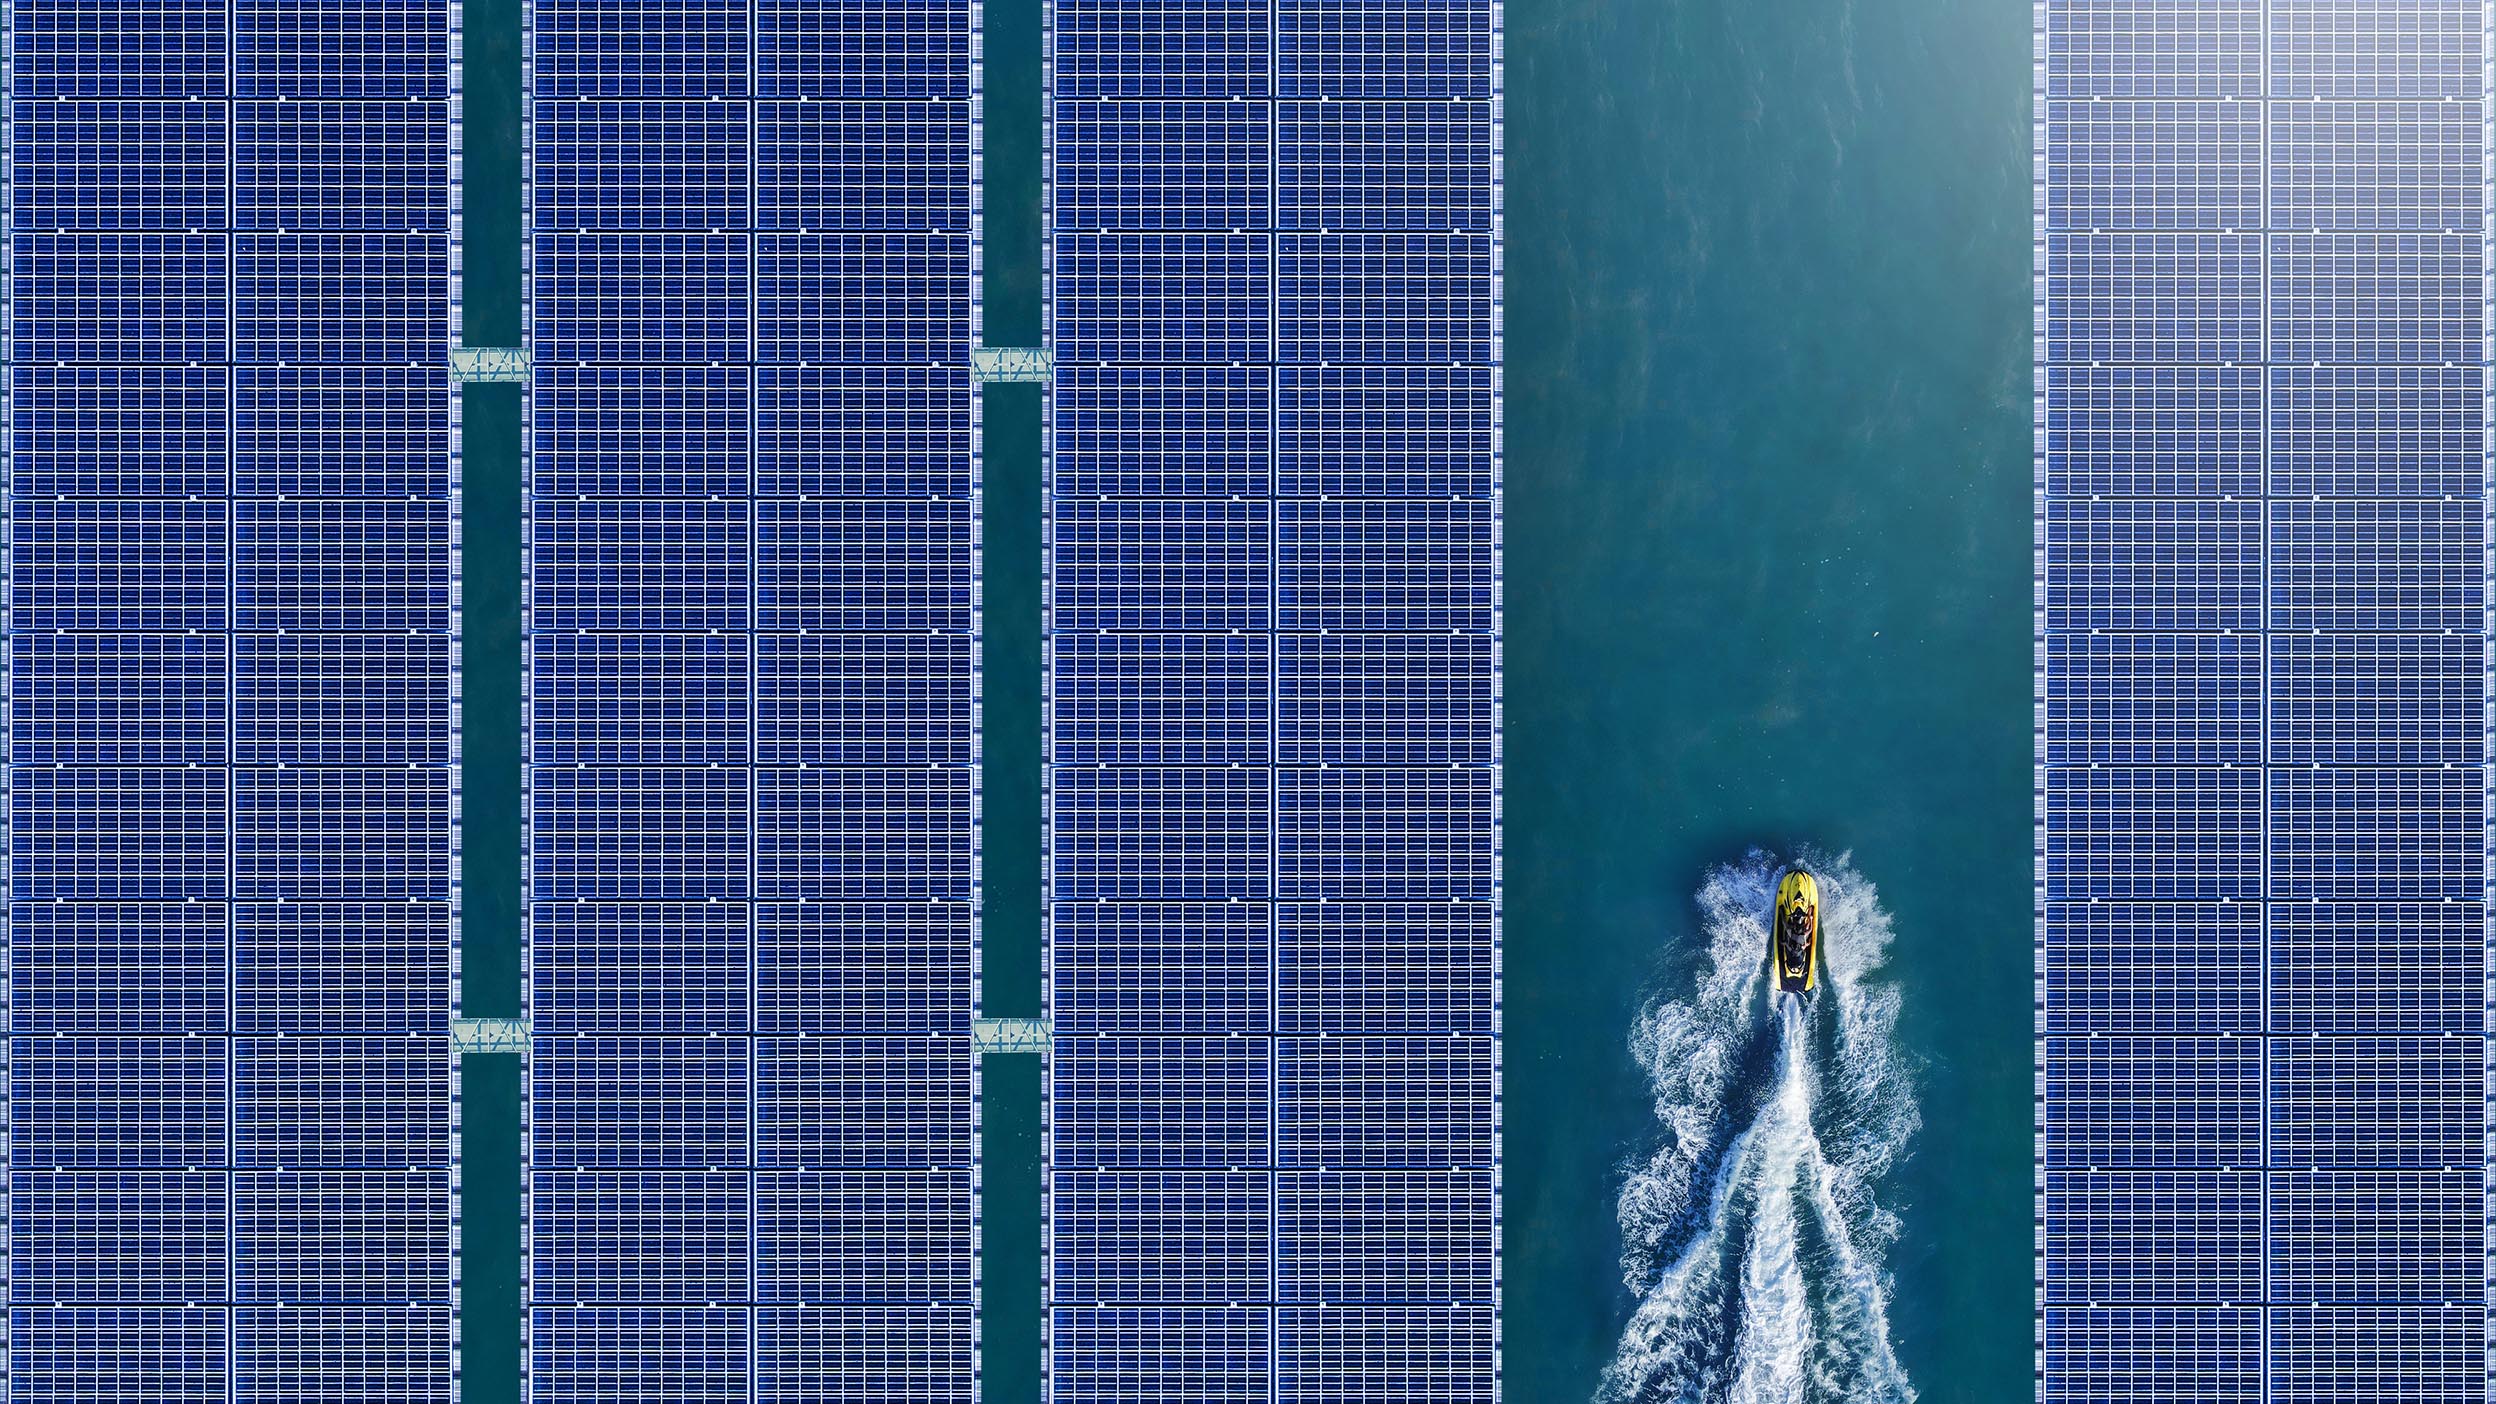 A boat rides through a row of solar panels over a body of water, representing one of the many innovative ways that companies within Invesco QQQ ETF are harnessing energy.